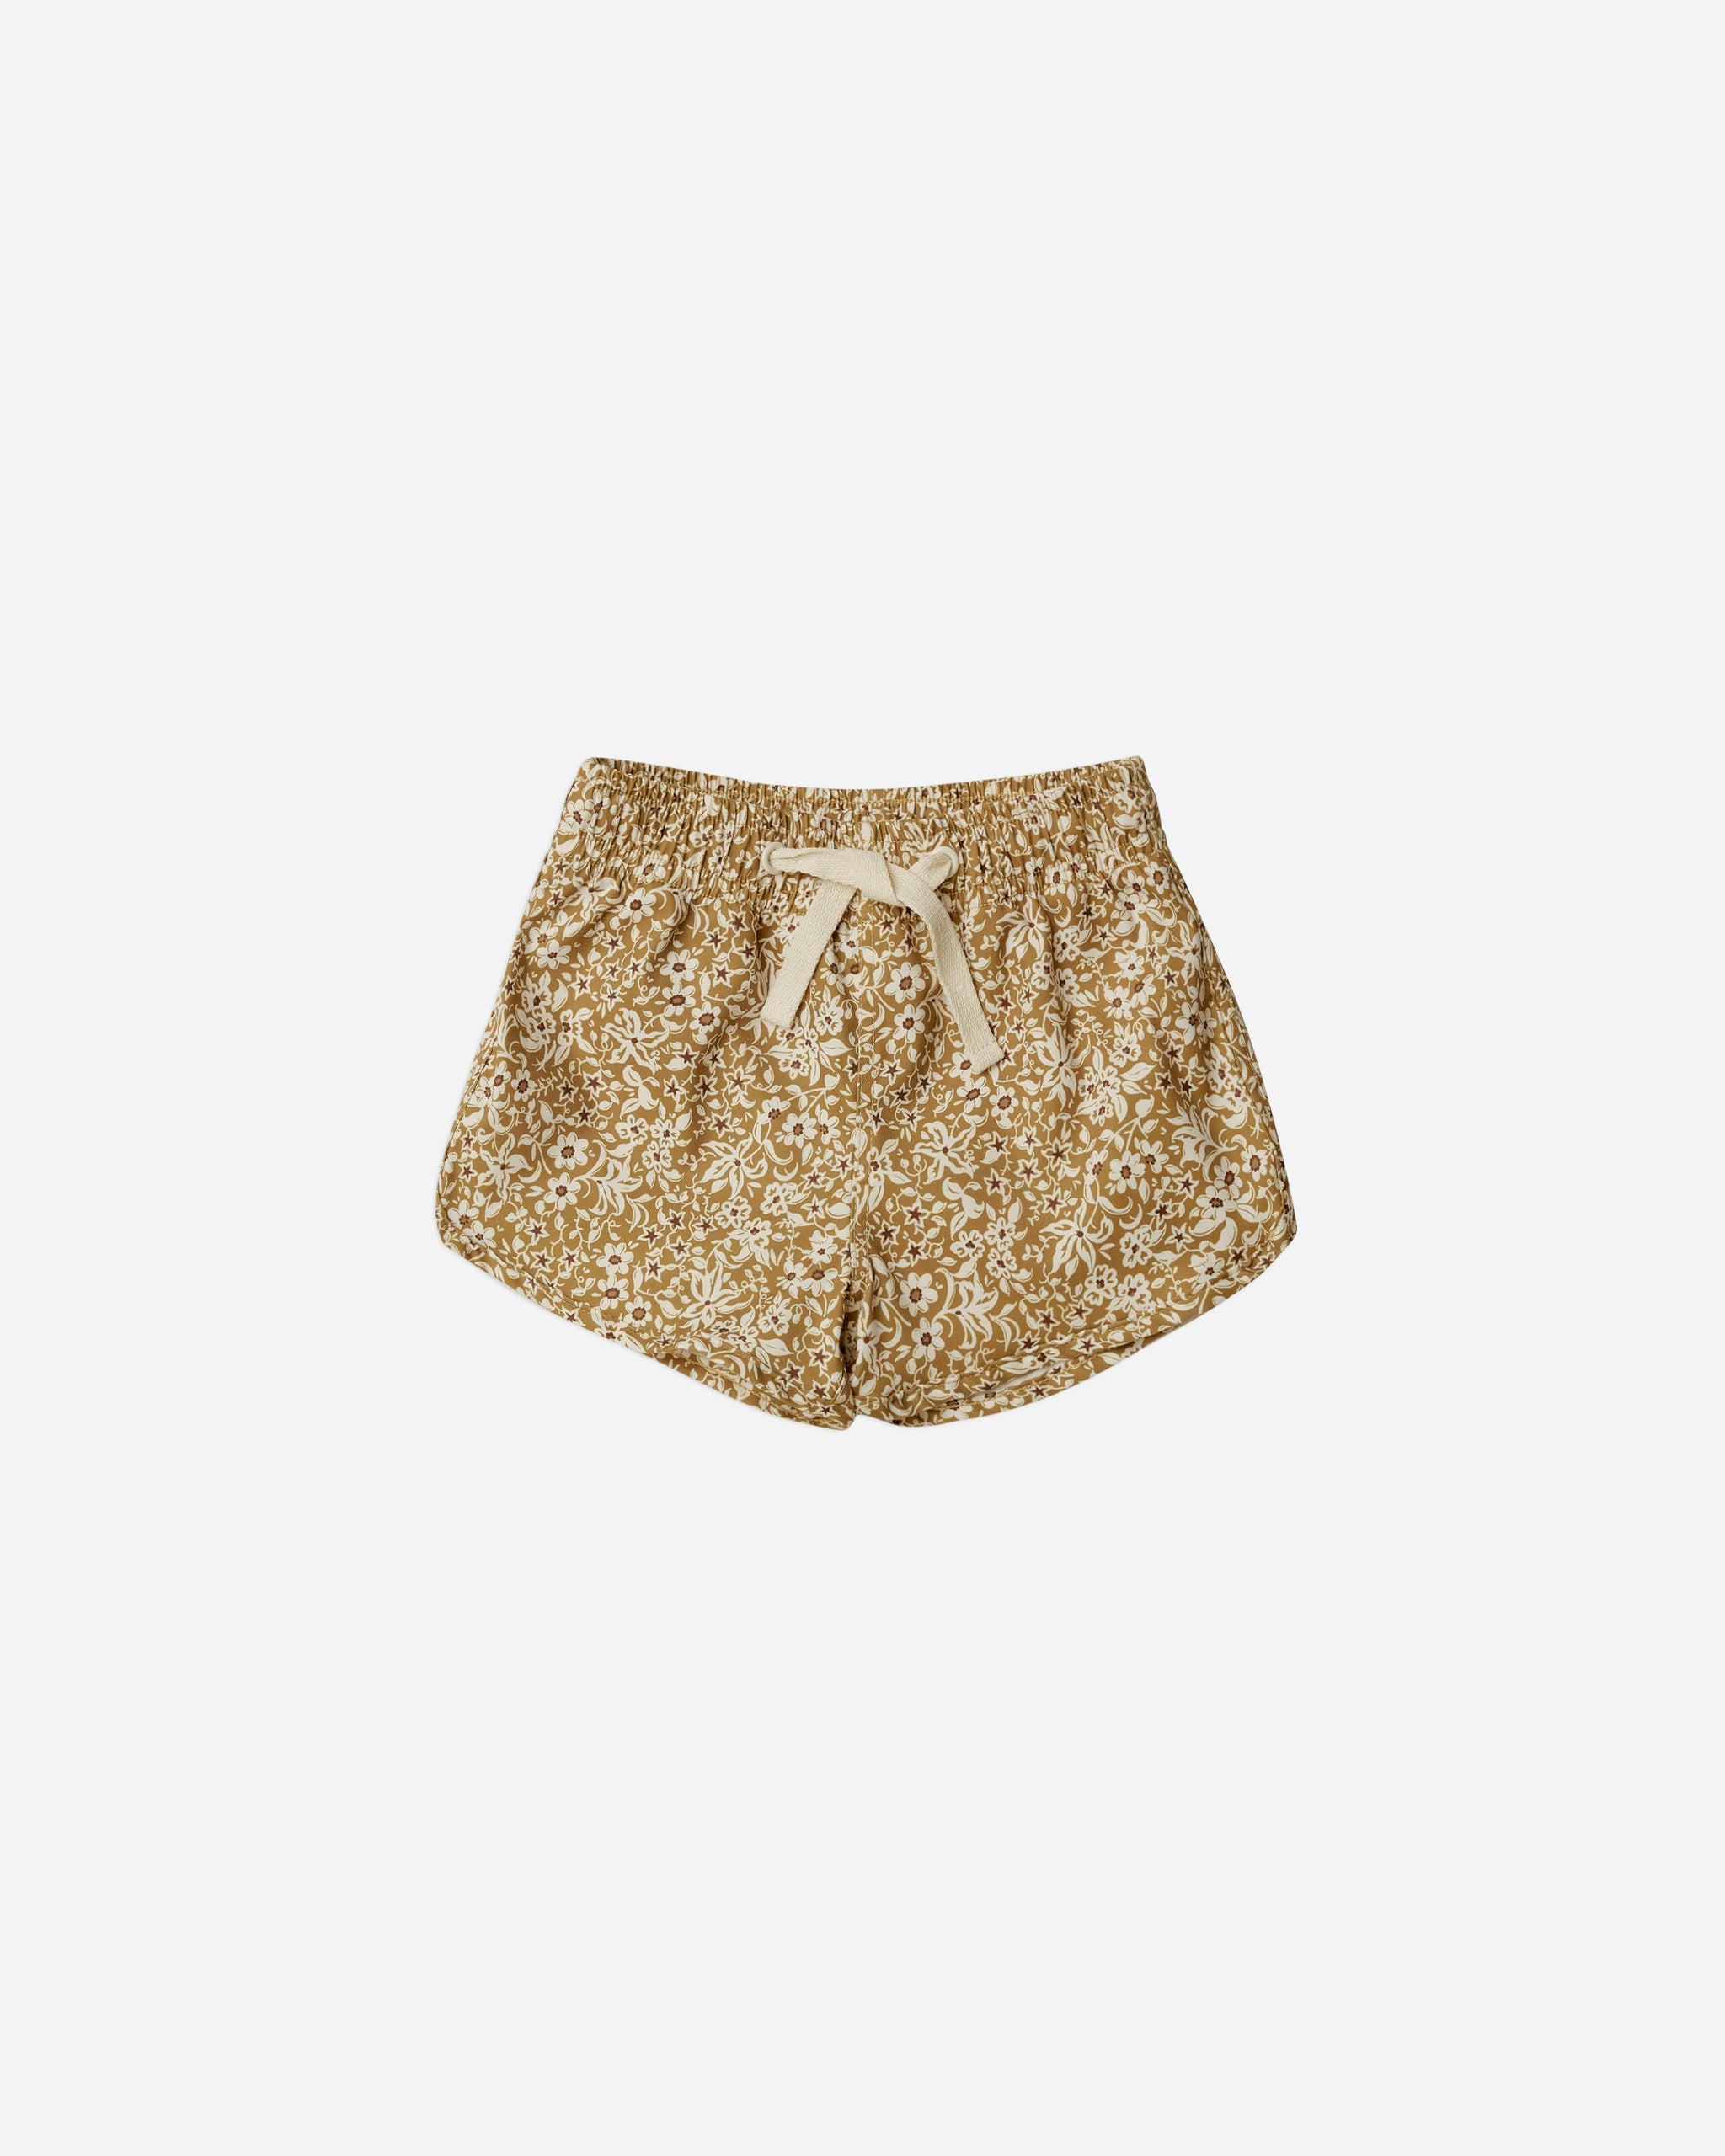 swim trunk || golden ditsy - Rylee + Cru | Kids Clothes | Trendy Baby Clothes | Modern Infant Outfits |